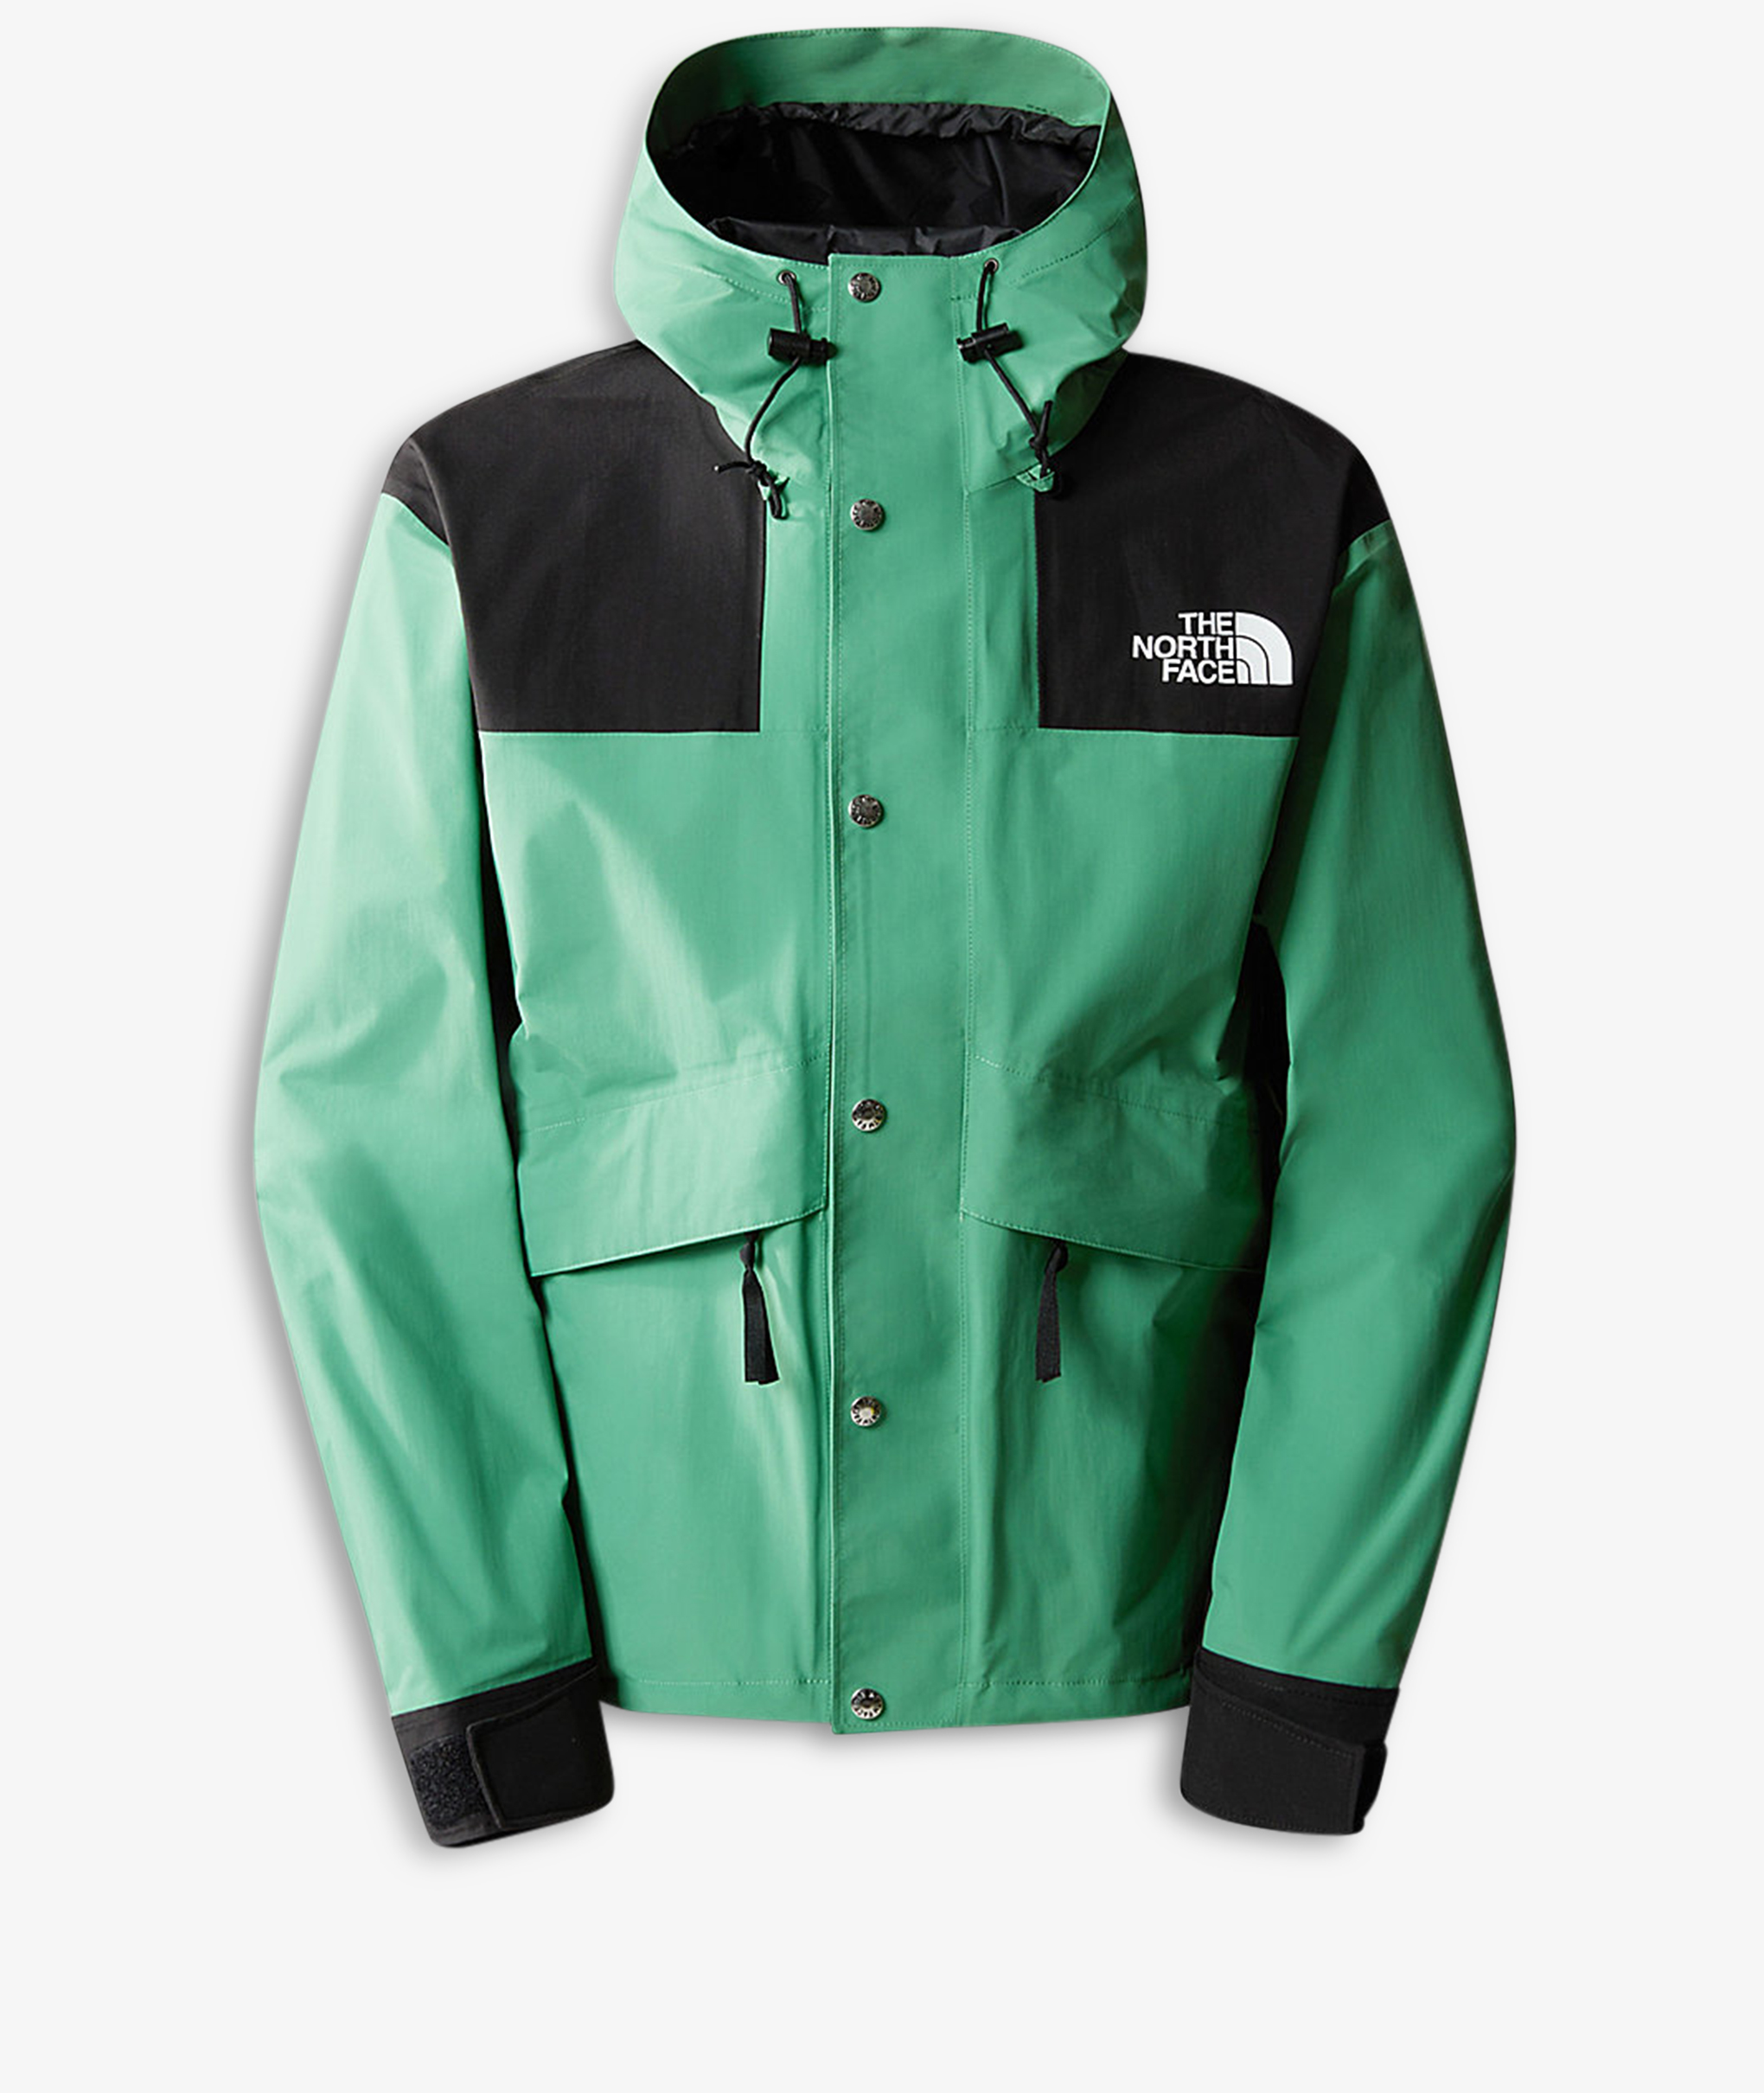 Norse Store | Shipping Worldwide - The North Face 86 Retro